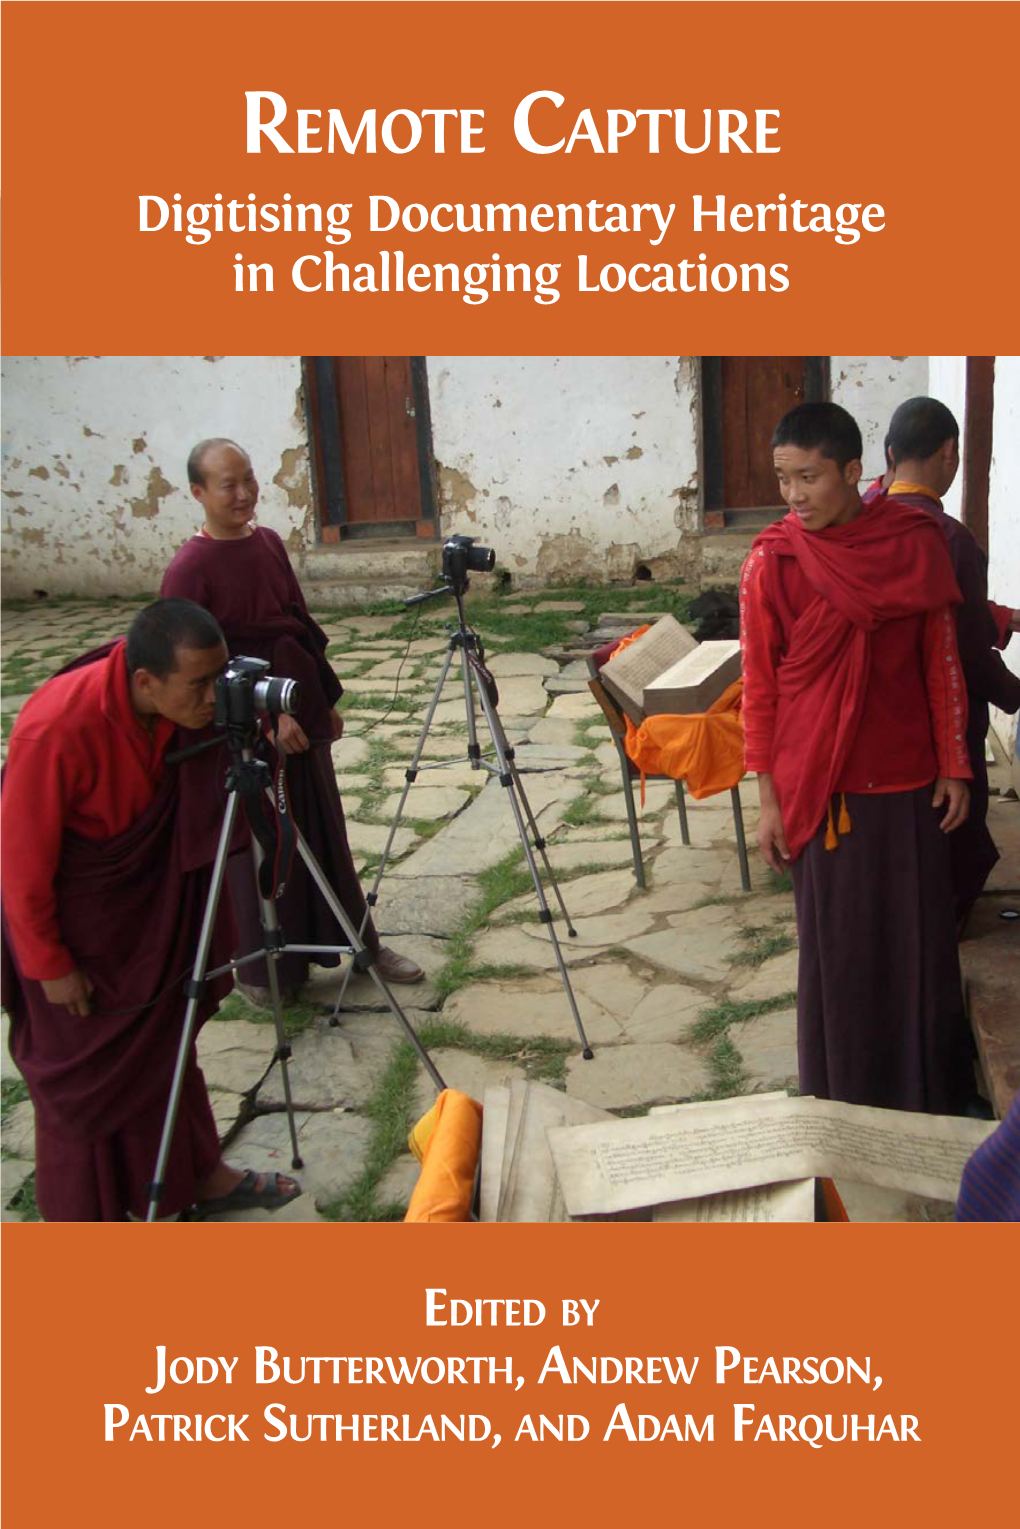 REMOTE CAPTURE Digitising Documentary Heritage in Challenging Locations